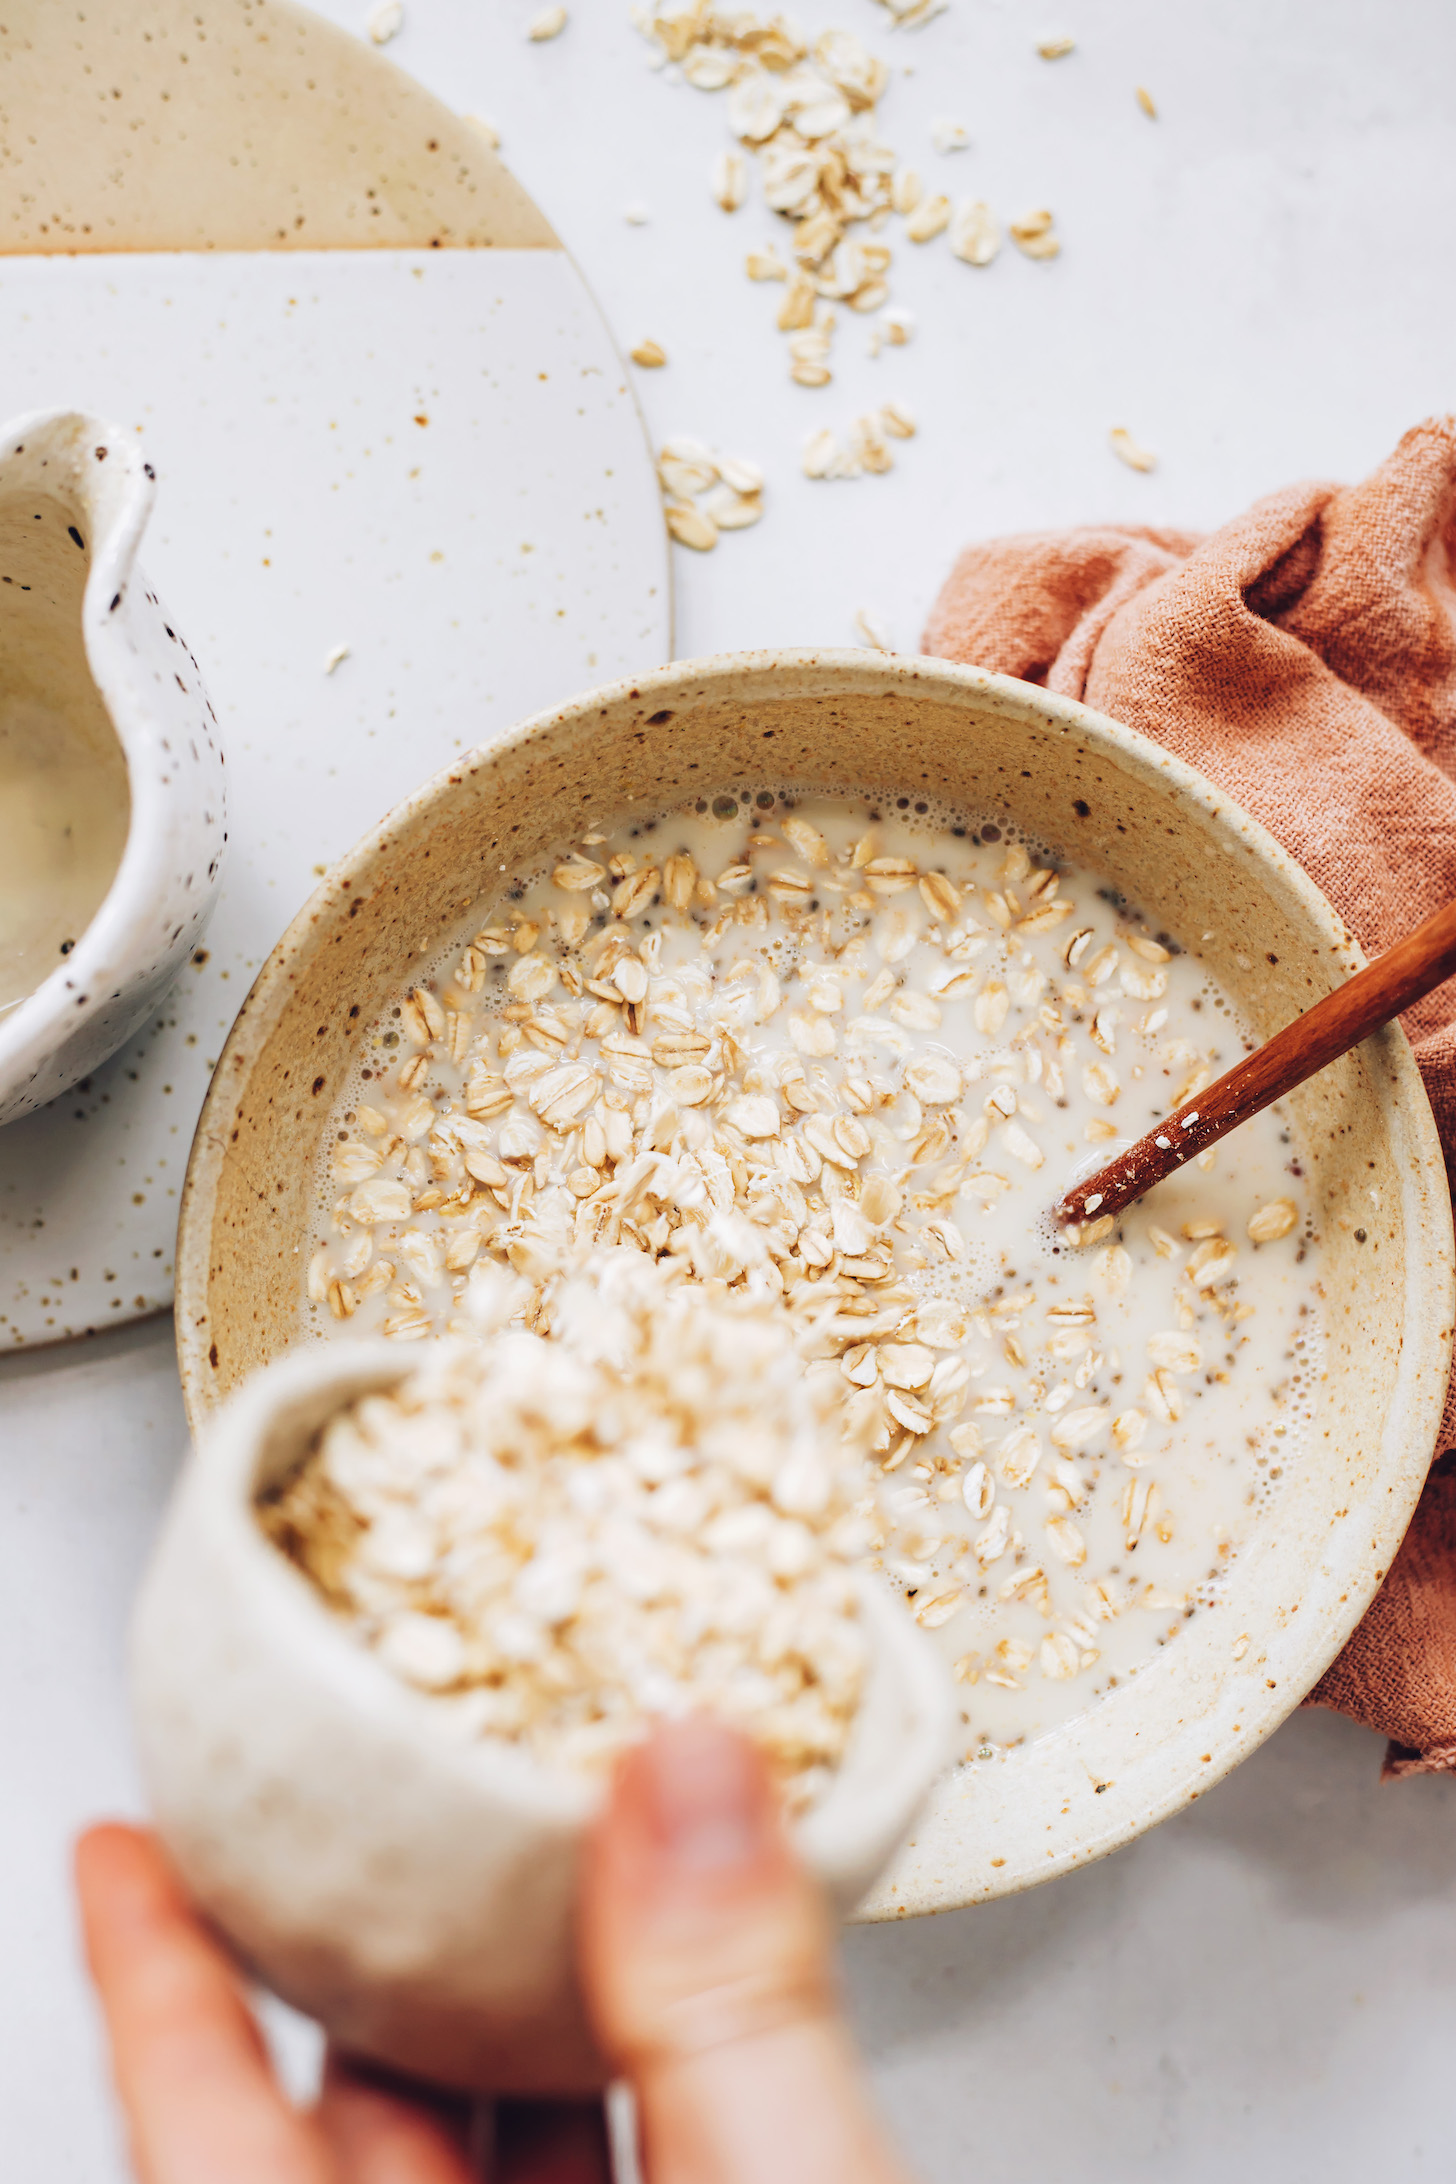 Pouring rolled oats into a bowl of almond milk, chia seeds, and other overnight oat ingredients